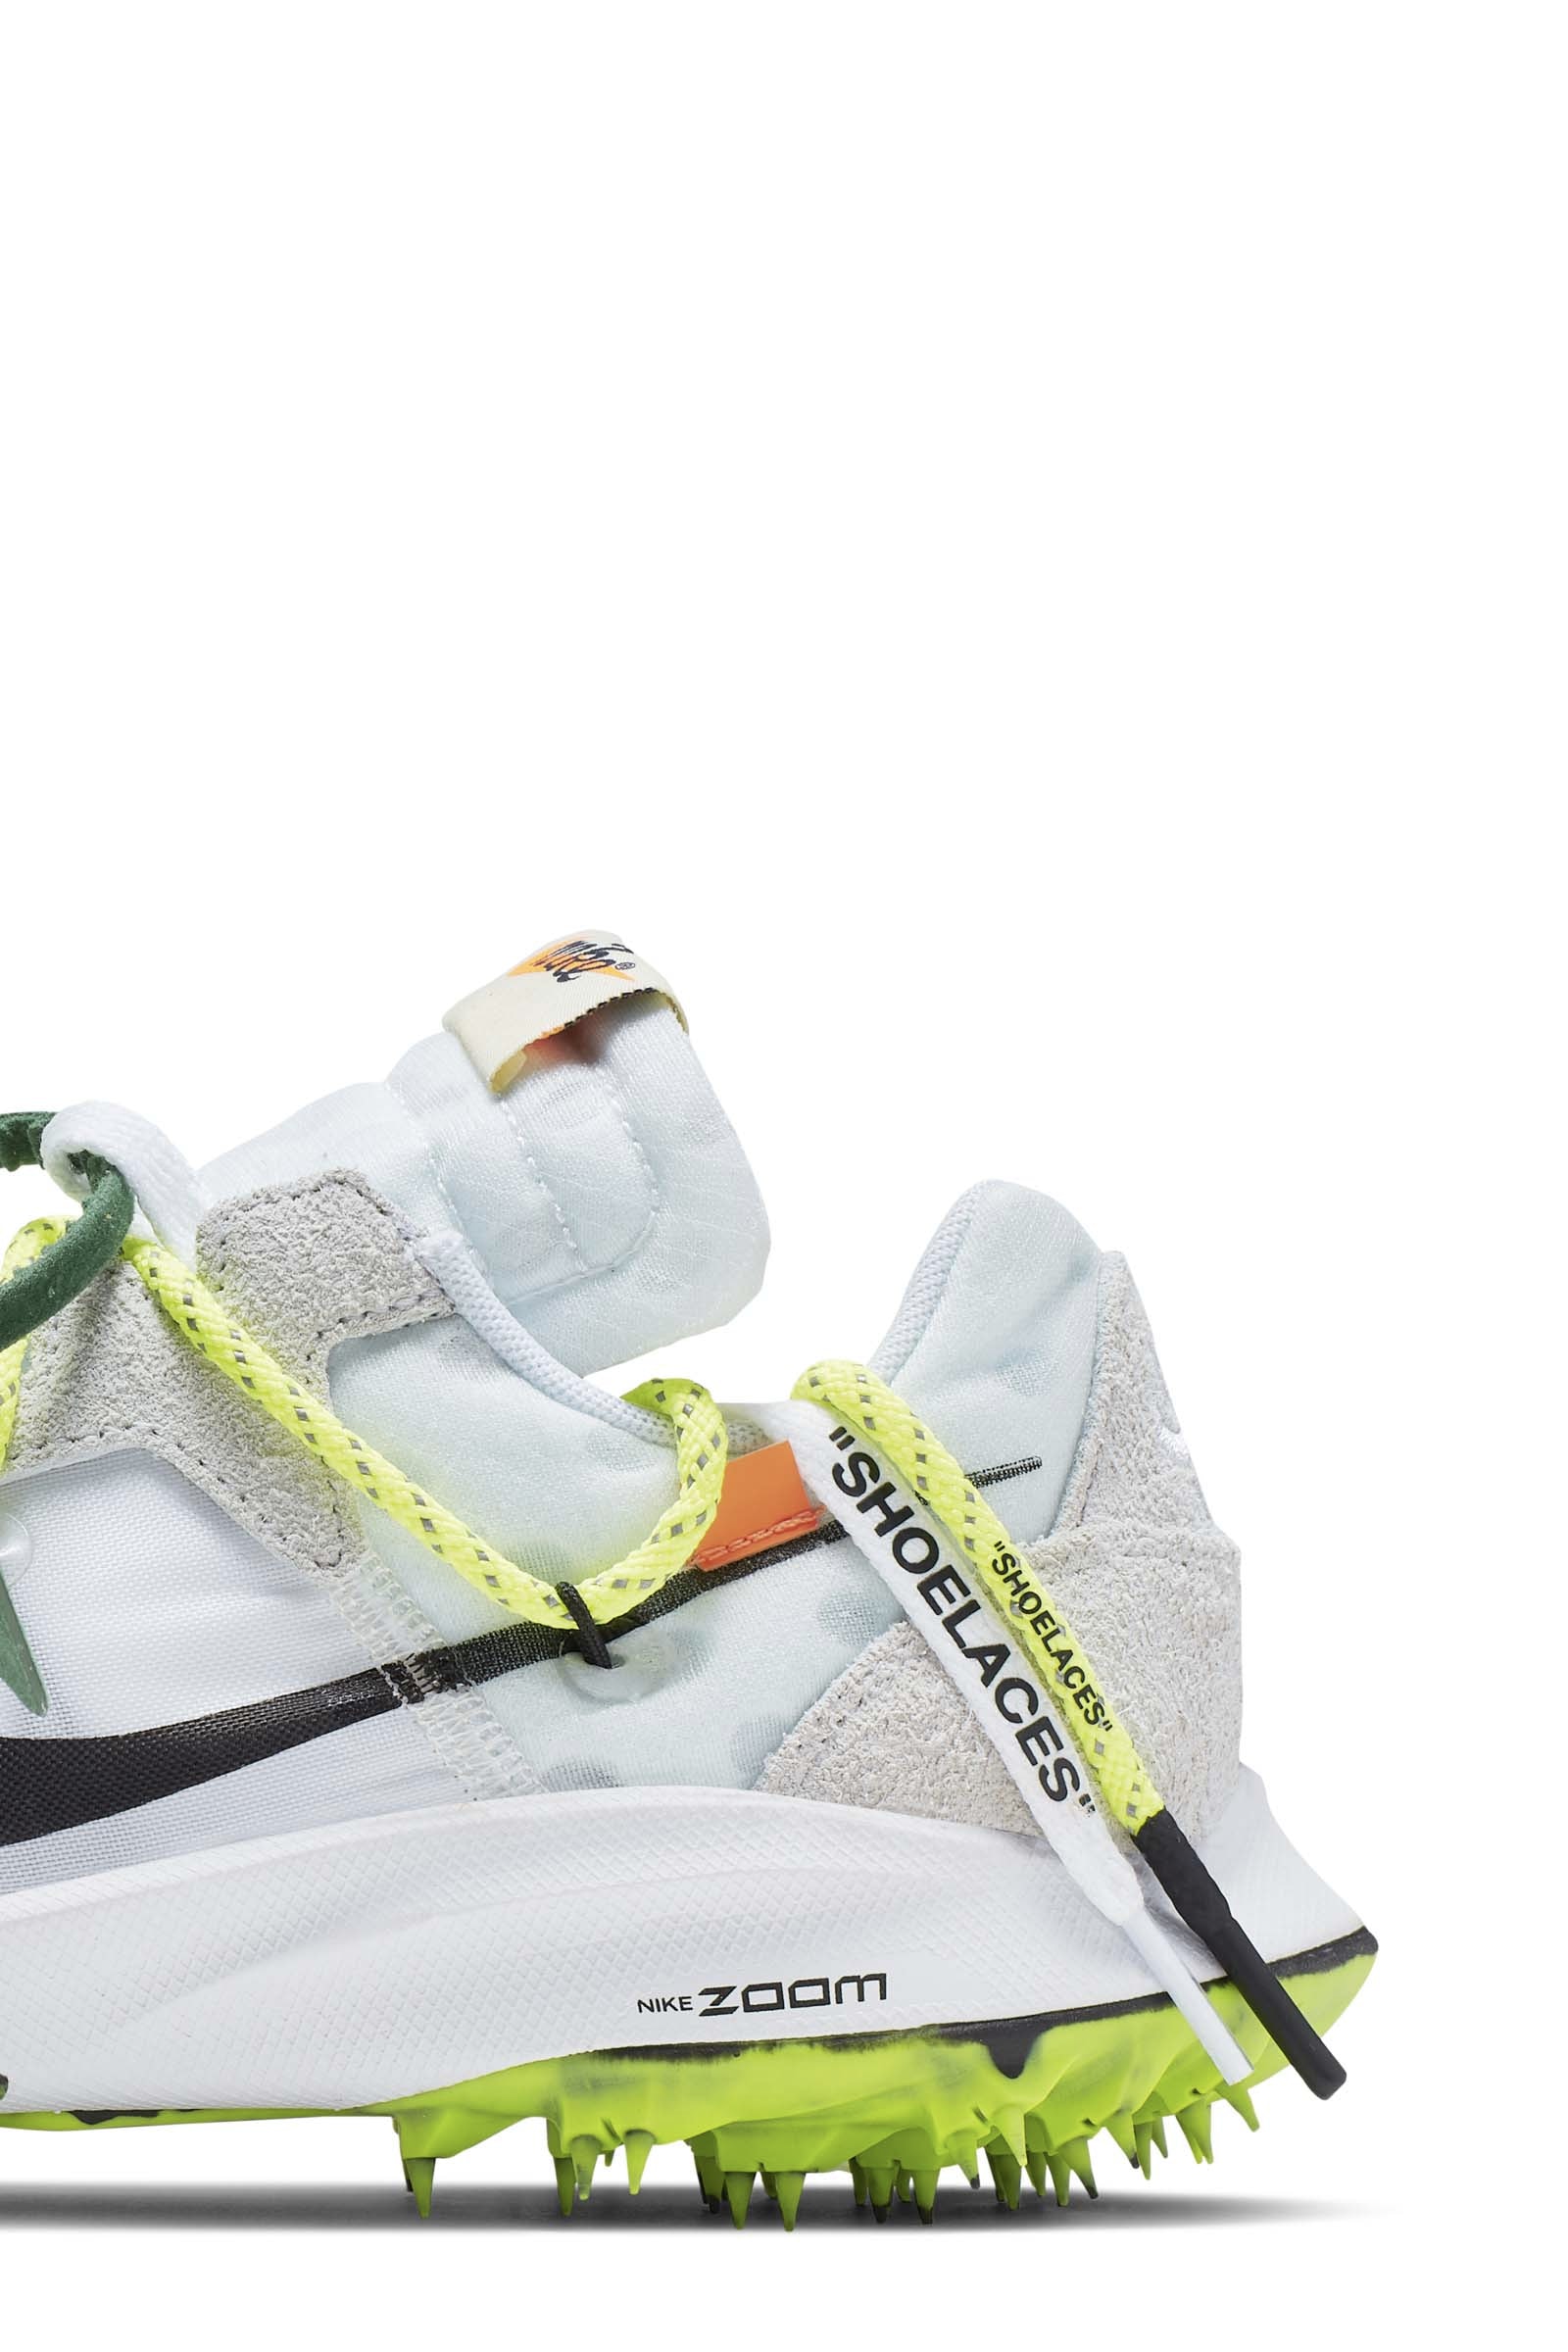 Off-White Nike sneakers athlete collection sortie date photos